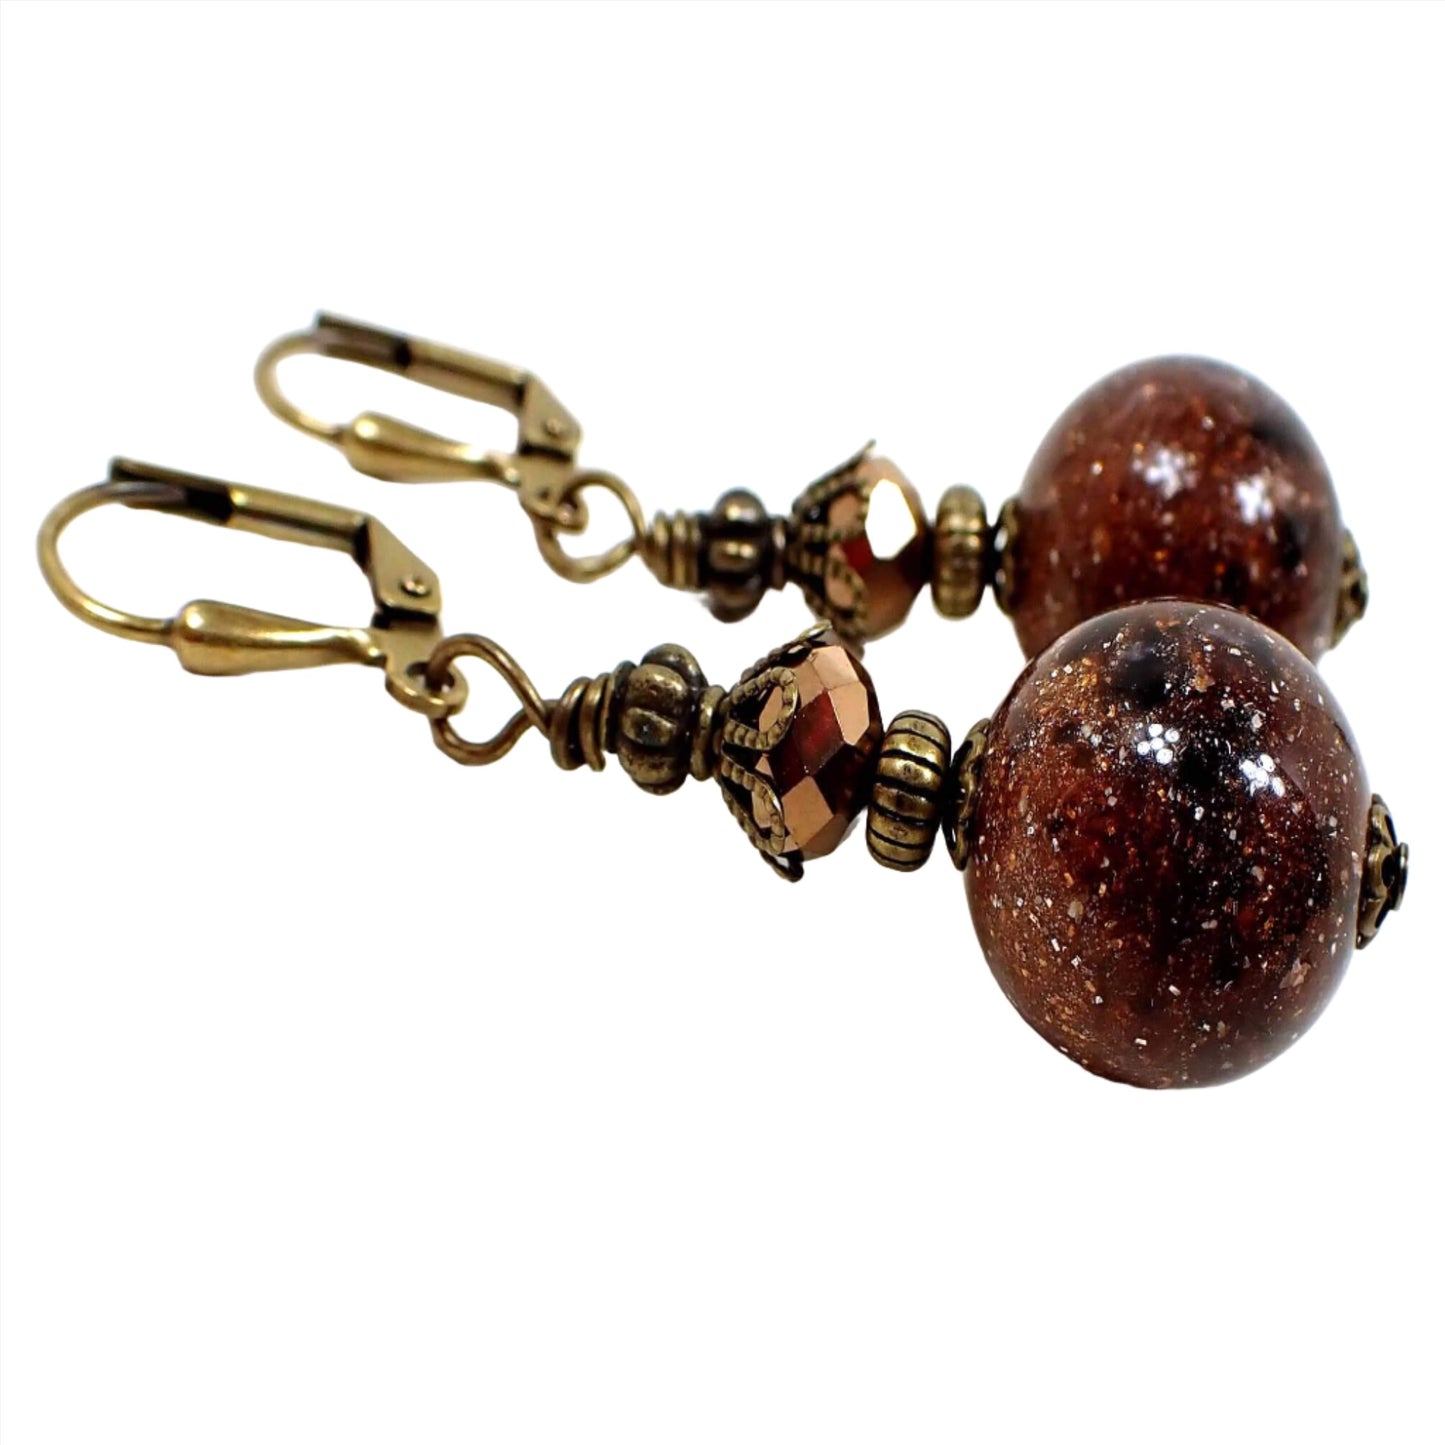 Angled side view of the handmade sparkly brown lucite galaxy earrings. The metal is antiqued brass in color. It has a faceted glass metallic brown bead at the top and a round lucite bead at the bottom that has tiny sparkles and swirls of brown and black that resembles a galaxy like appearance.